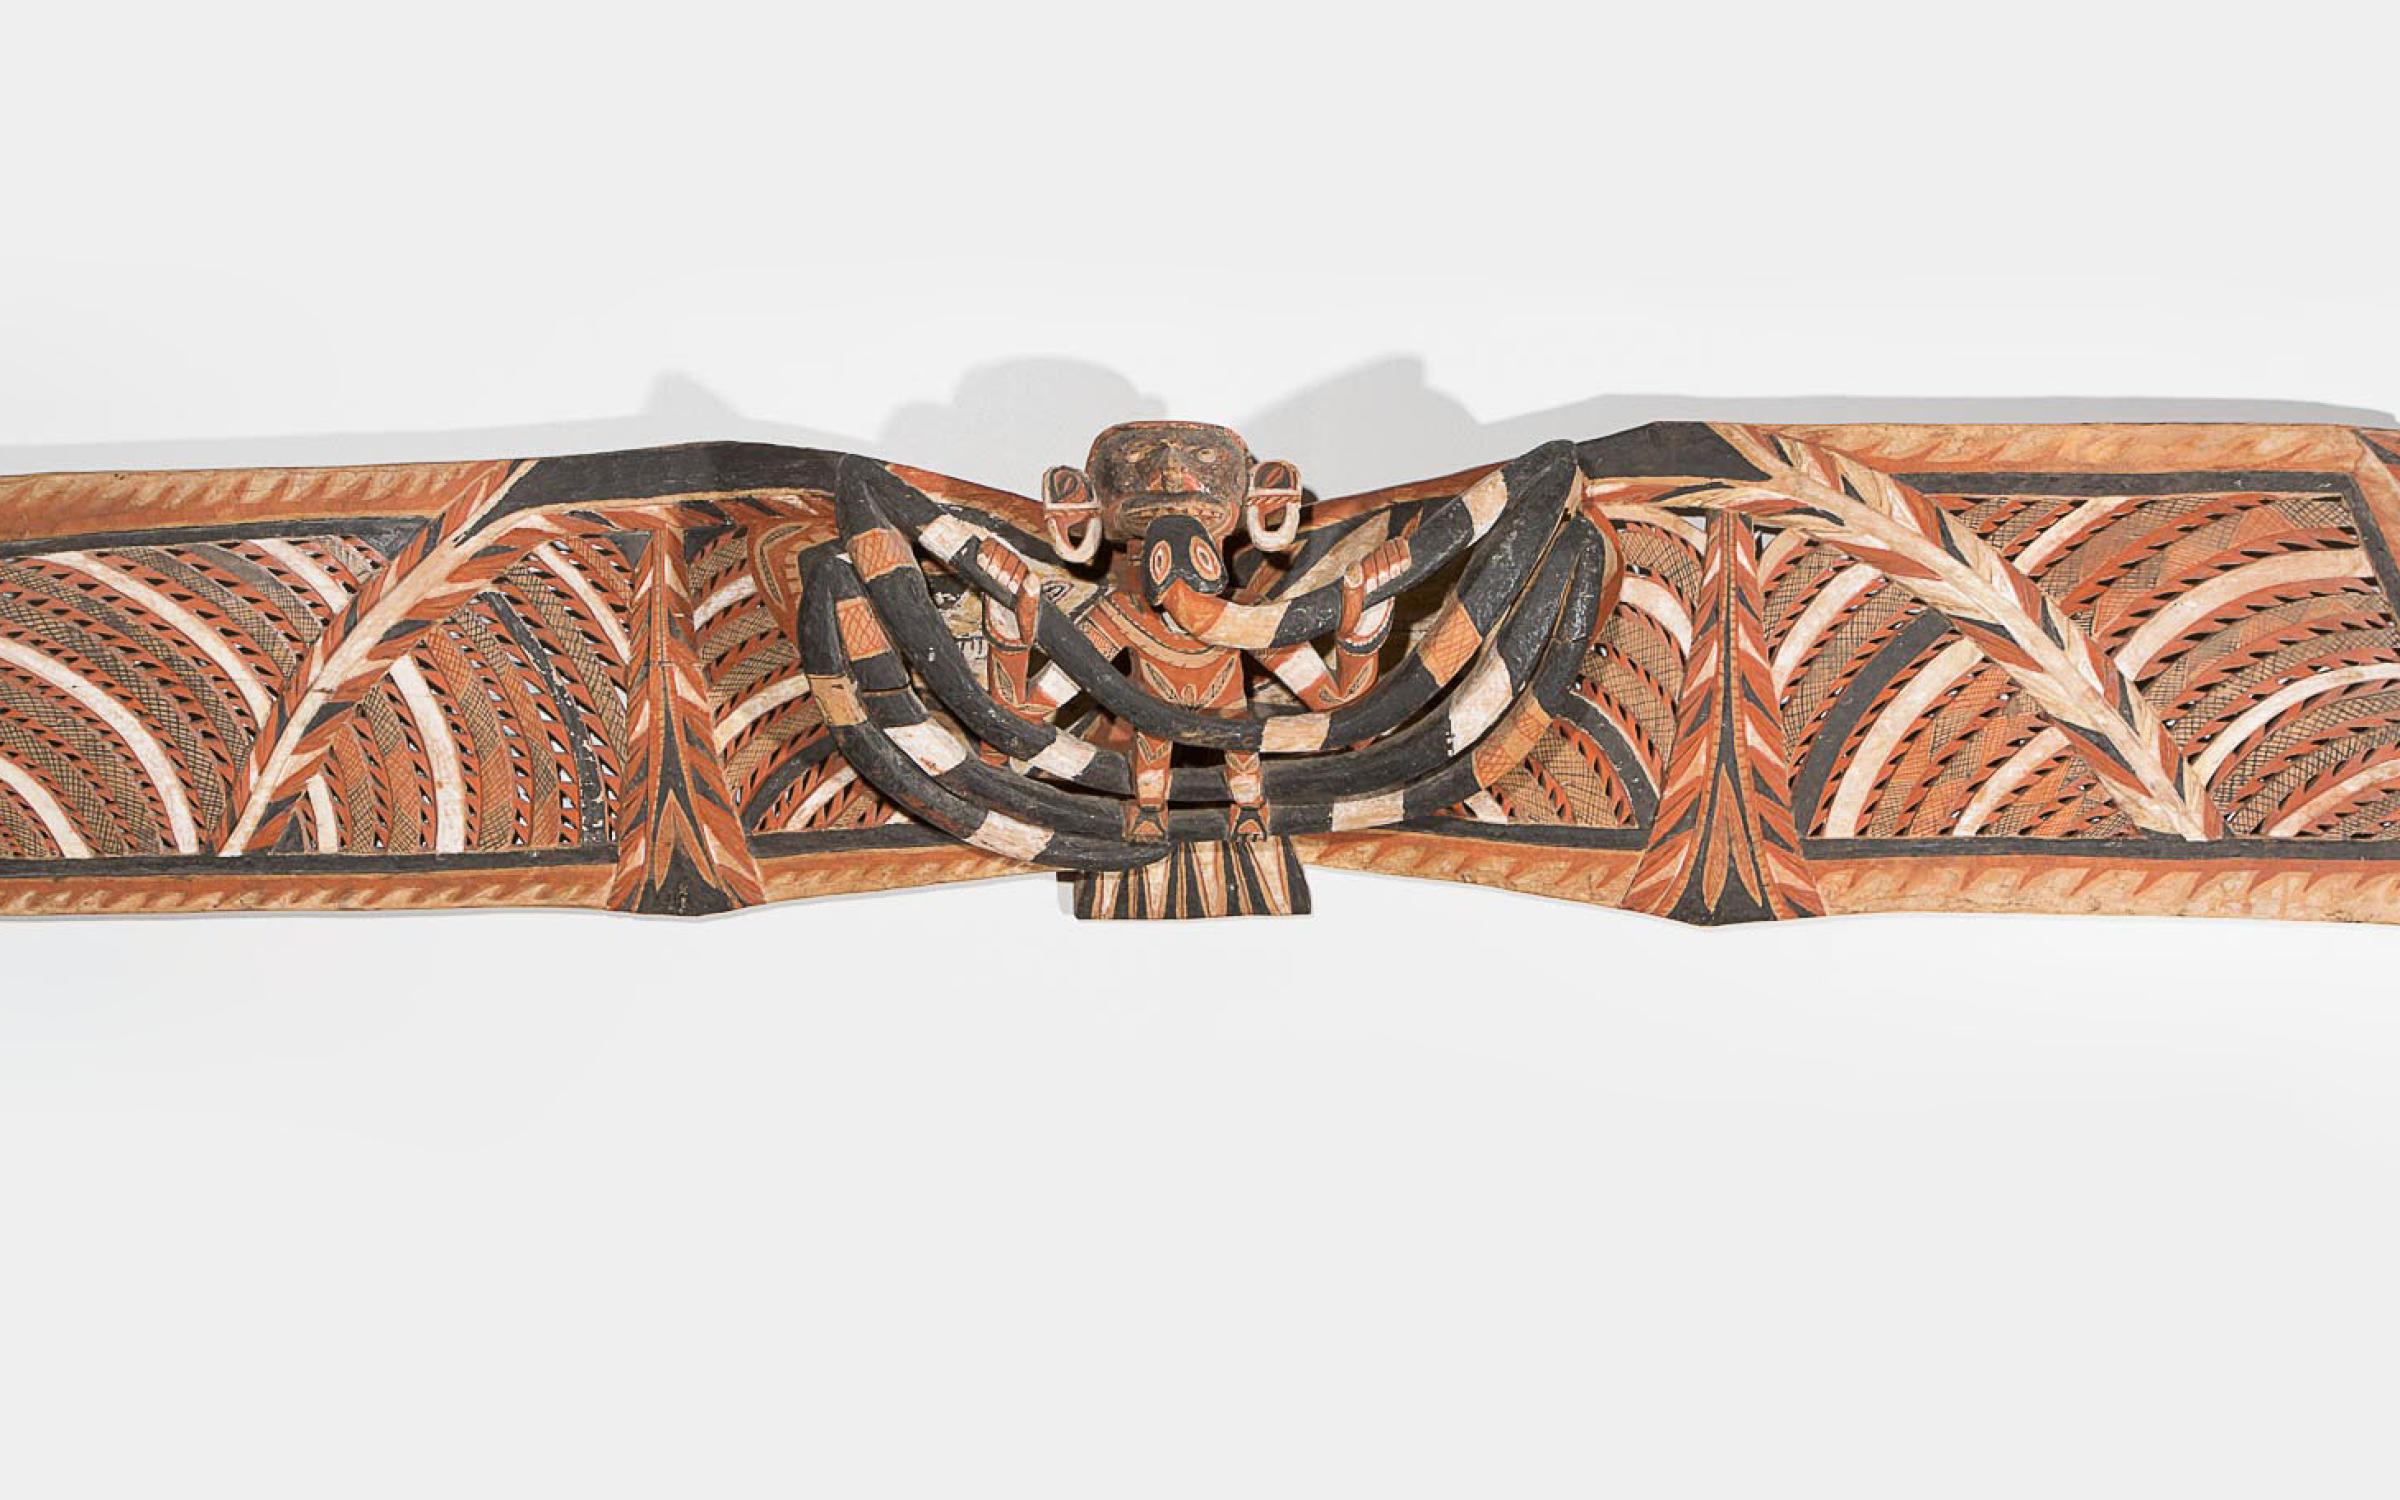 Unidentified Artist, New Ireland, Papua New Guinea, Malagan Frieze, twentieth century, wood, pigment, Ulfert Wilke Collection, purchased with funds from the Friends of the Art Museum, UMFA1982.001.007